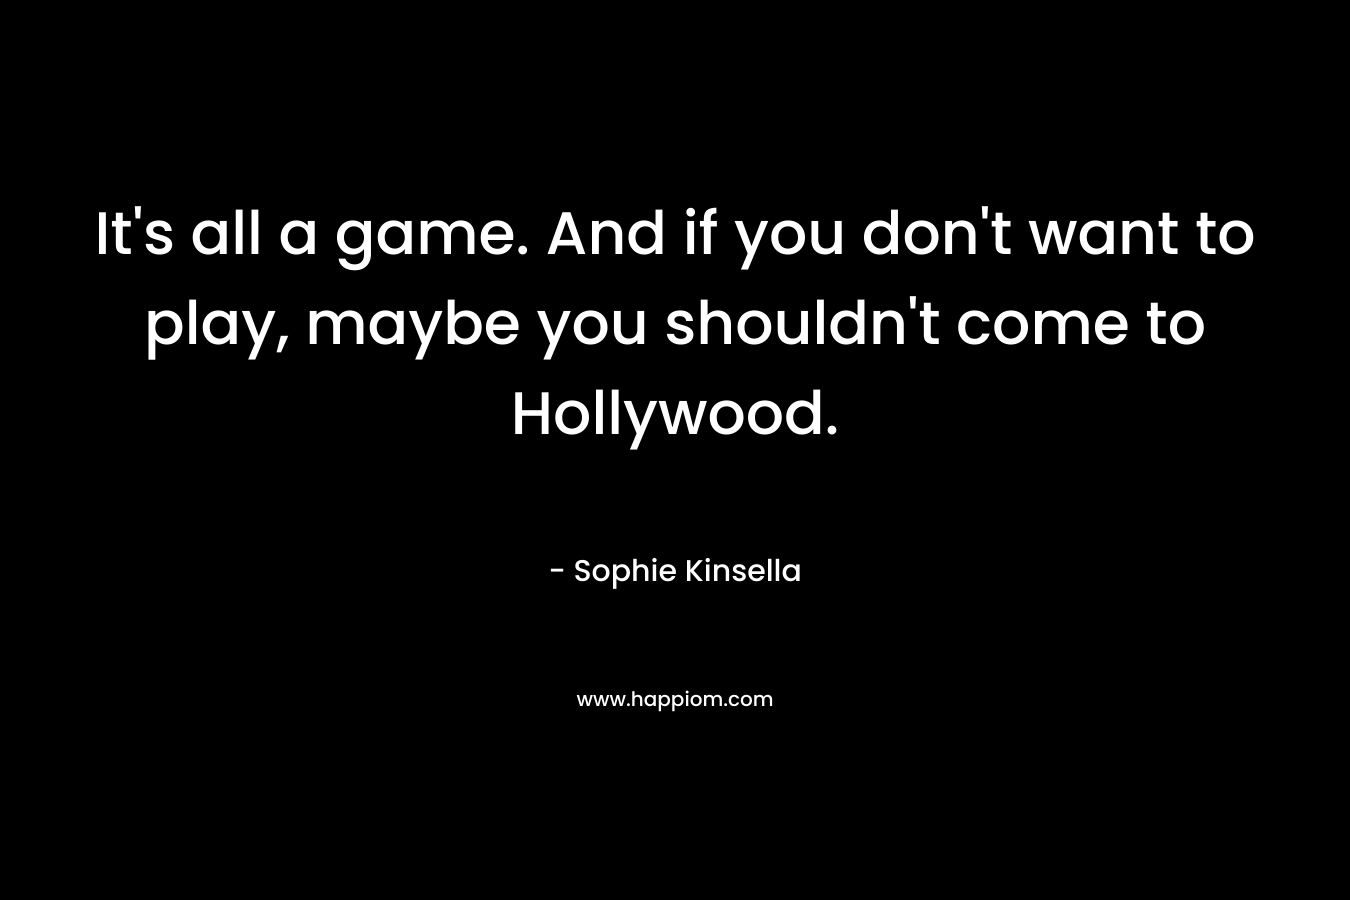 It’s all a game. And if you don’t want to play, maybe you shouldn’t come to Hollywood. – Sophie Kinsella